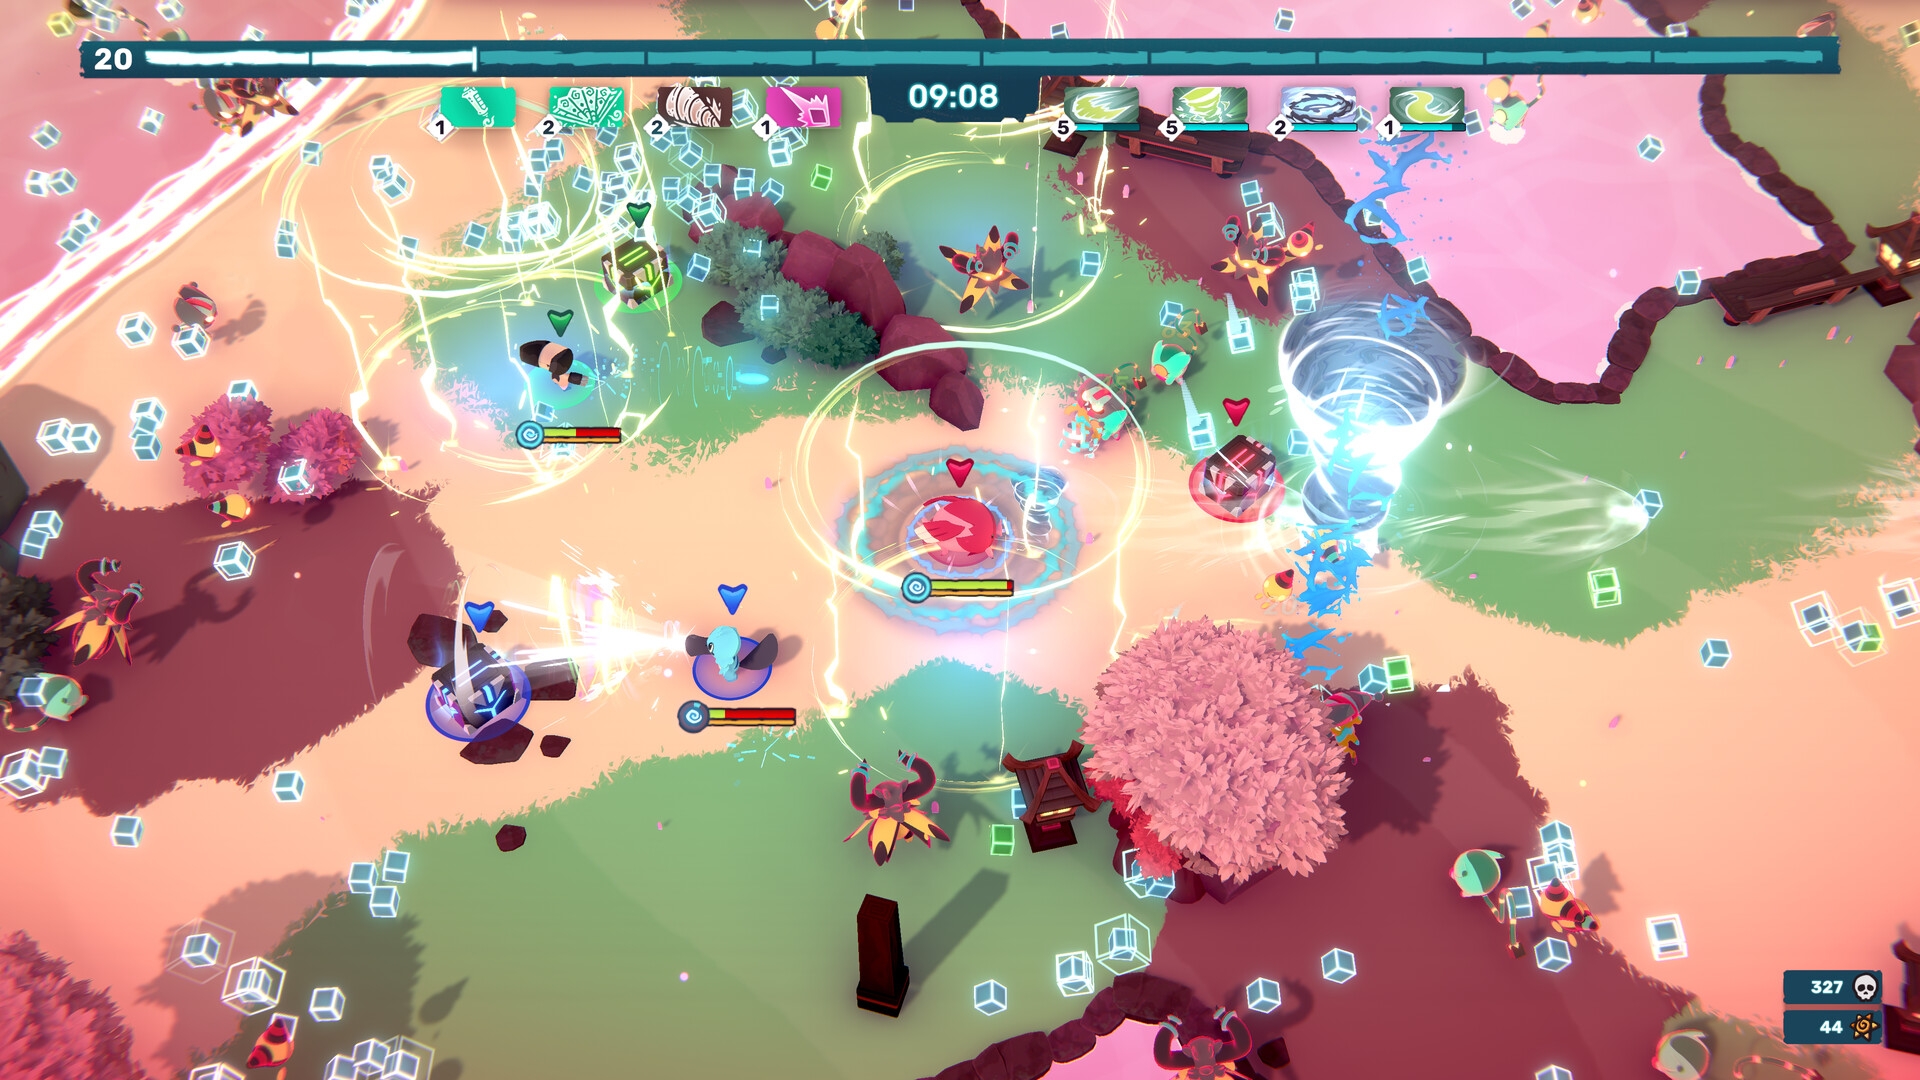 Temtem: Swarm is a New Bullet Heaven Game Built from the Ground Up for Co-Op